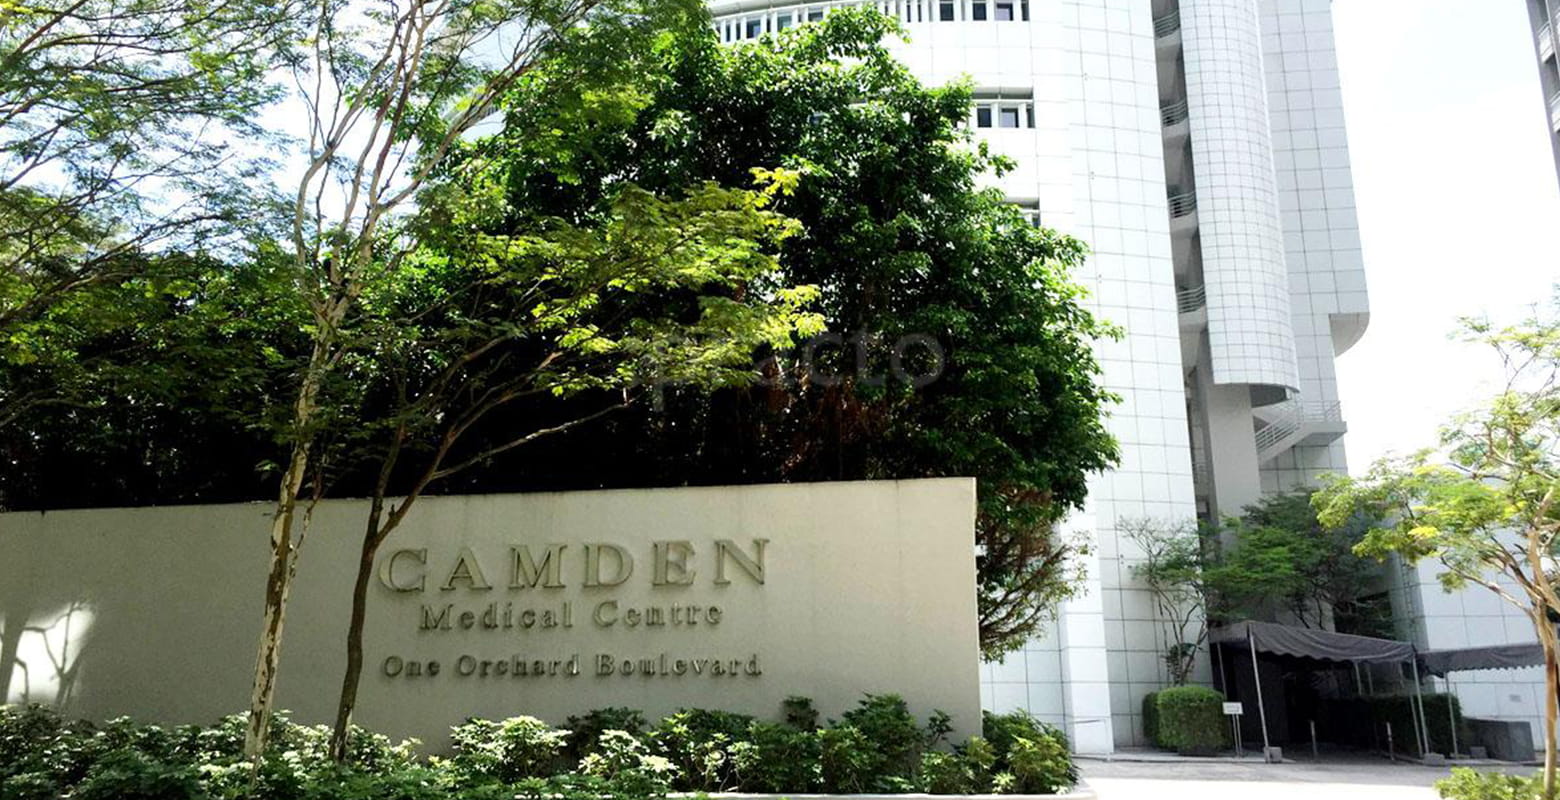 Road entrance to Camden Medical Centre Singapore General Hospital Interior works by ISG